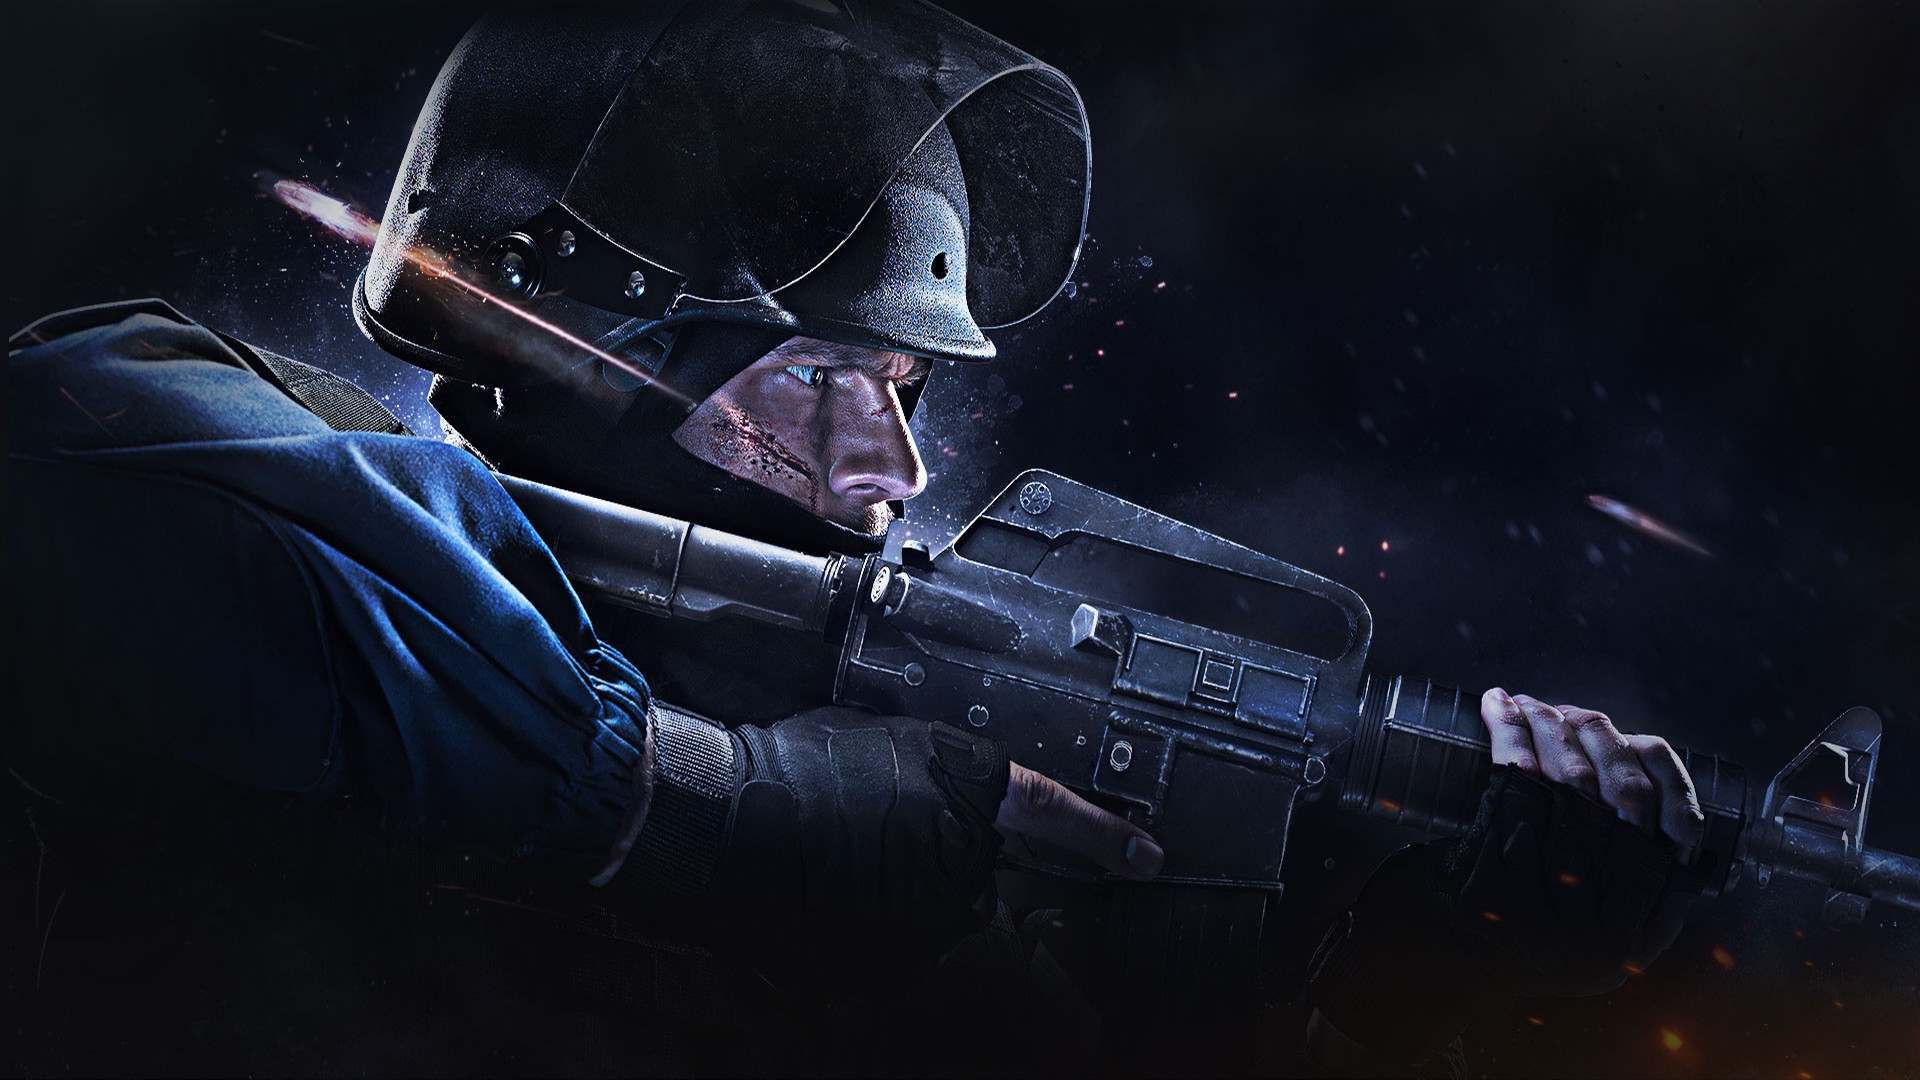 Best CSGO Wallpapers » The Latest Trends For You